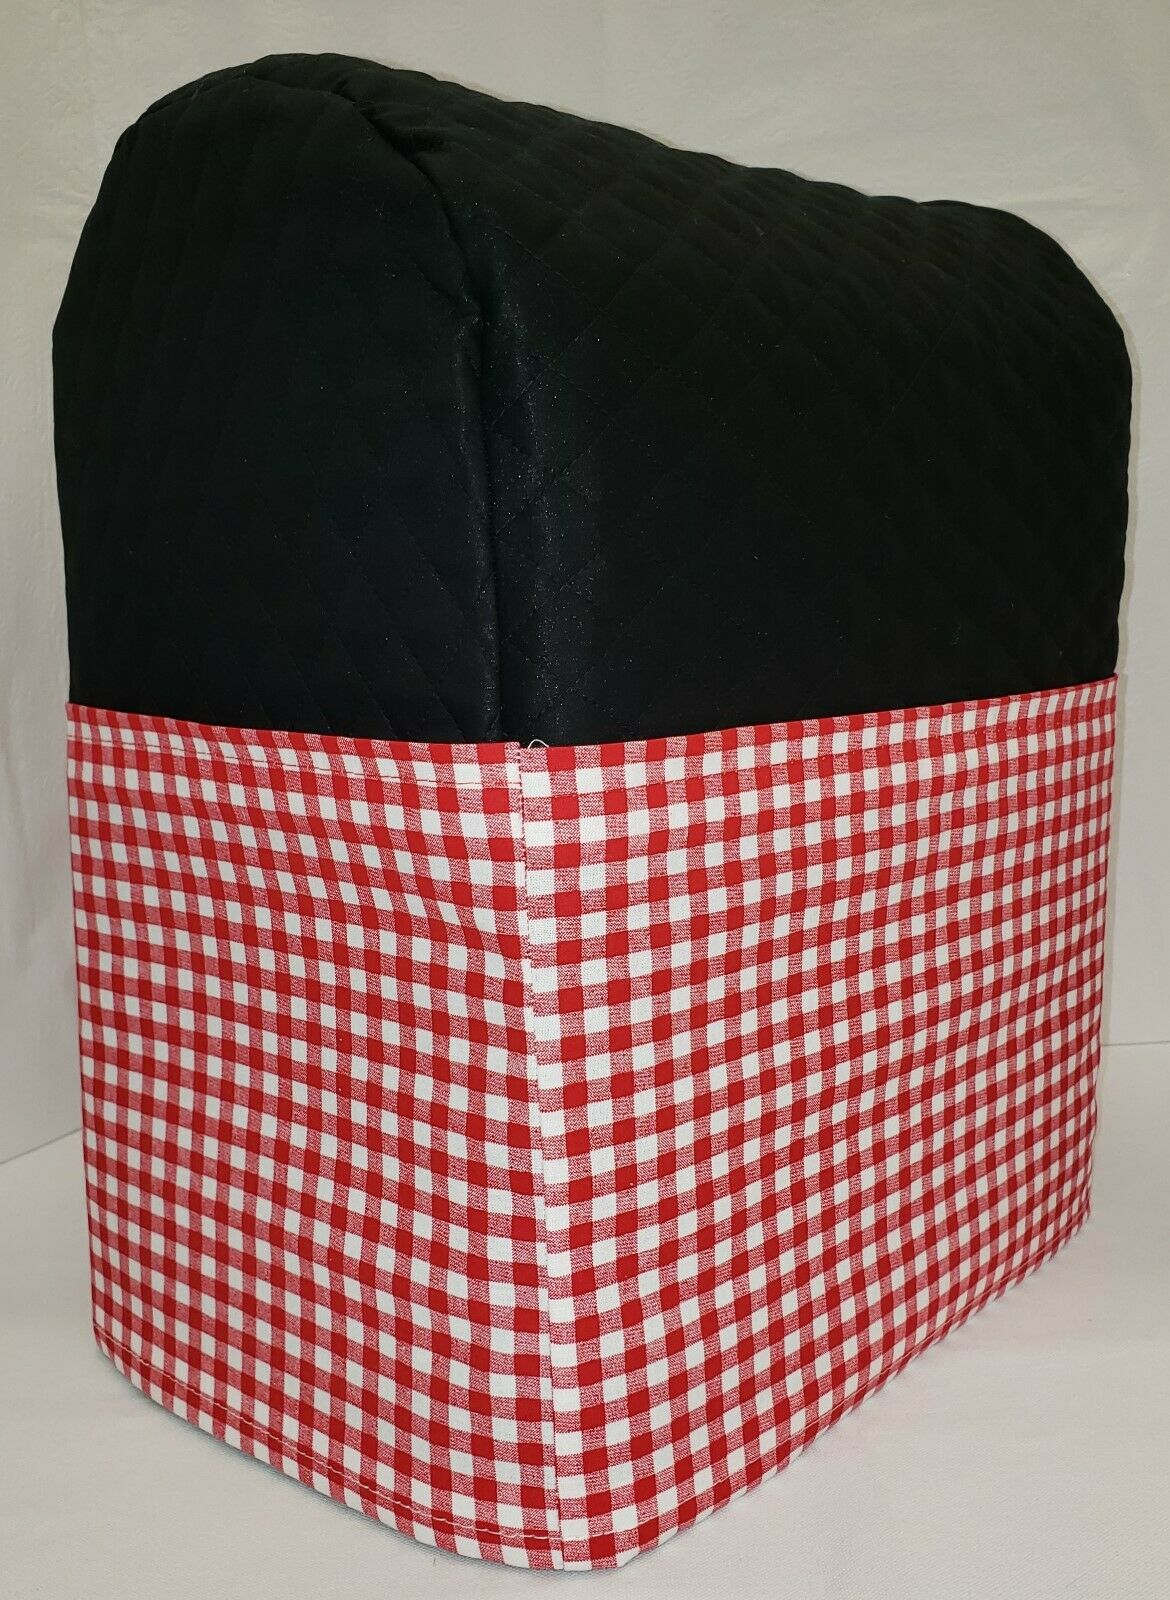 Red & White Checked Cover Compatible with Kitchenaid Stand Mixer by Penny's Needful Things (4.5 & 5 qt Tilt Head, Black) - image 1 of 1